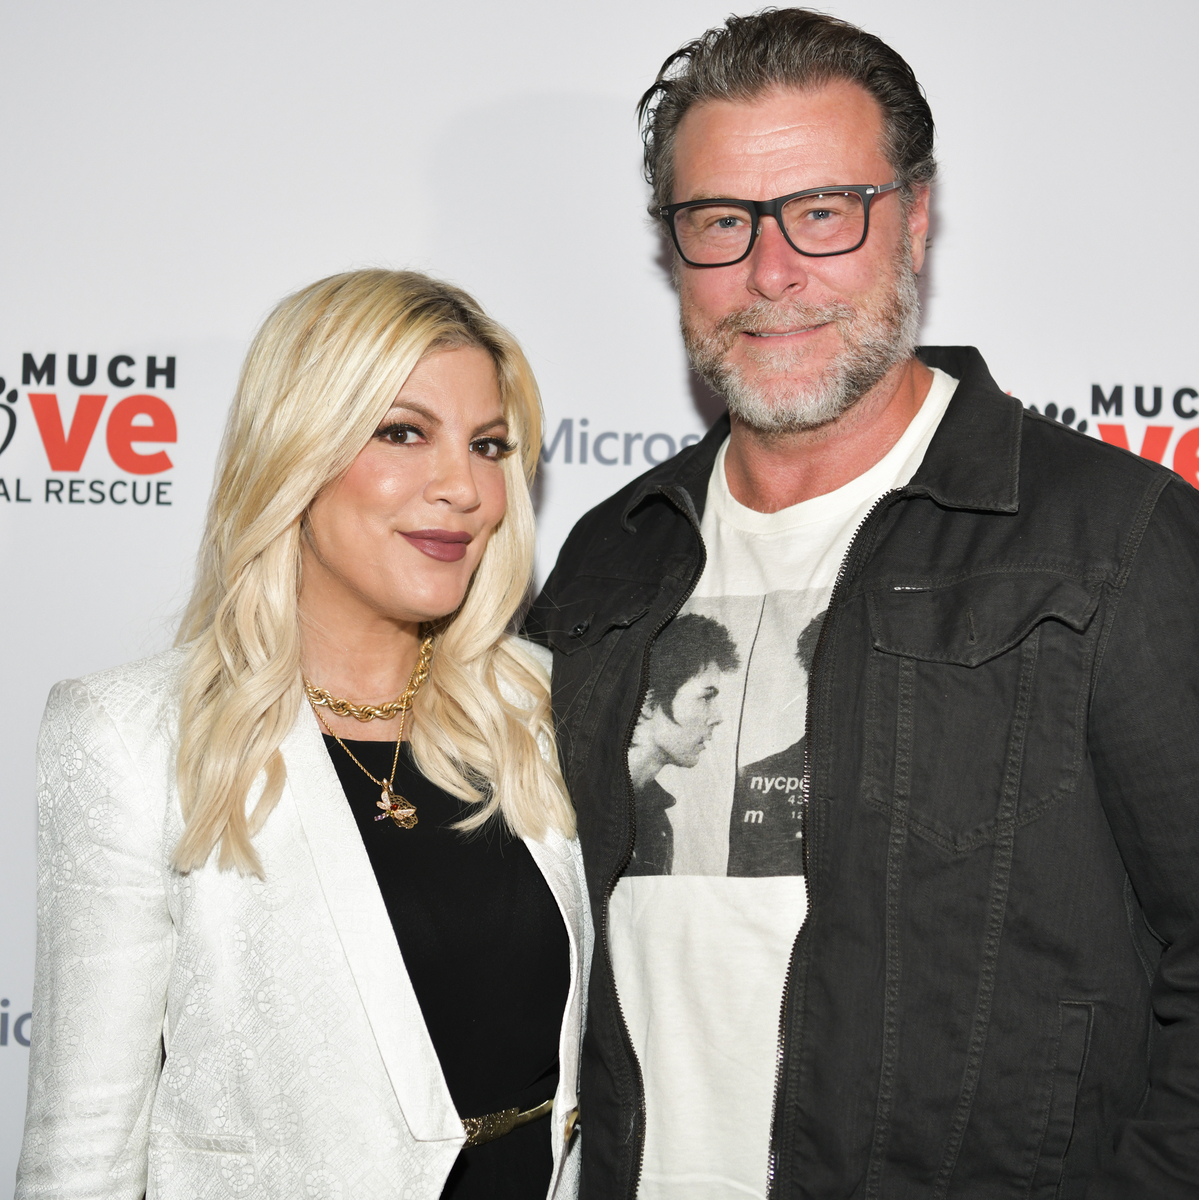 Tori Spelling Files for Divorce From Dean McDermott After 17 Years of Marriage